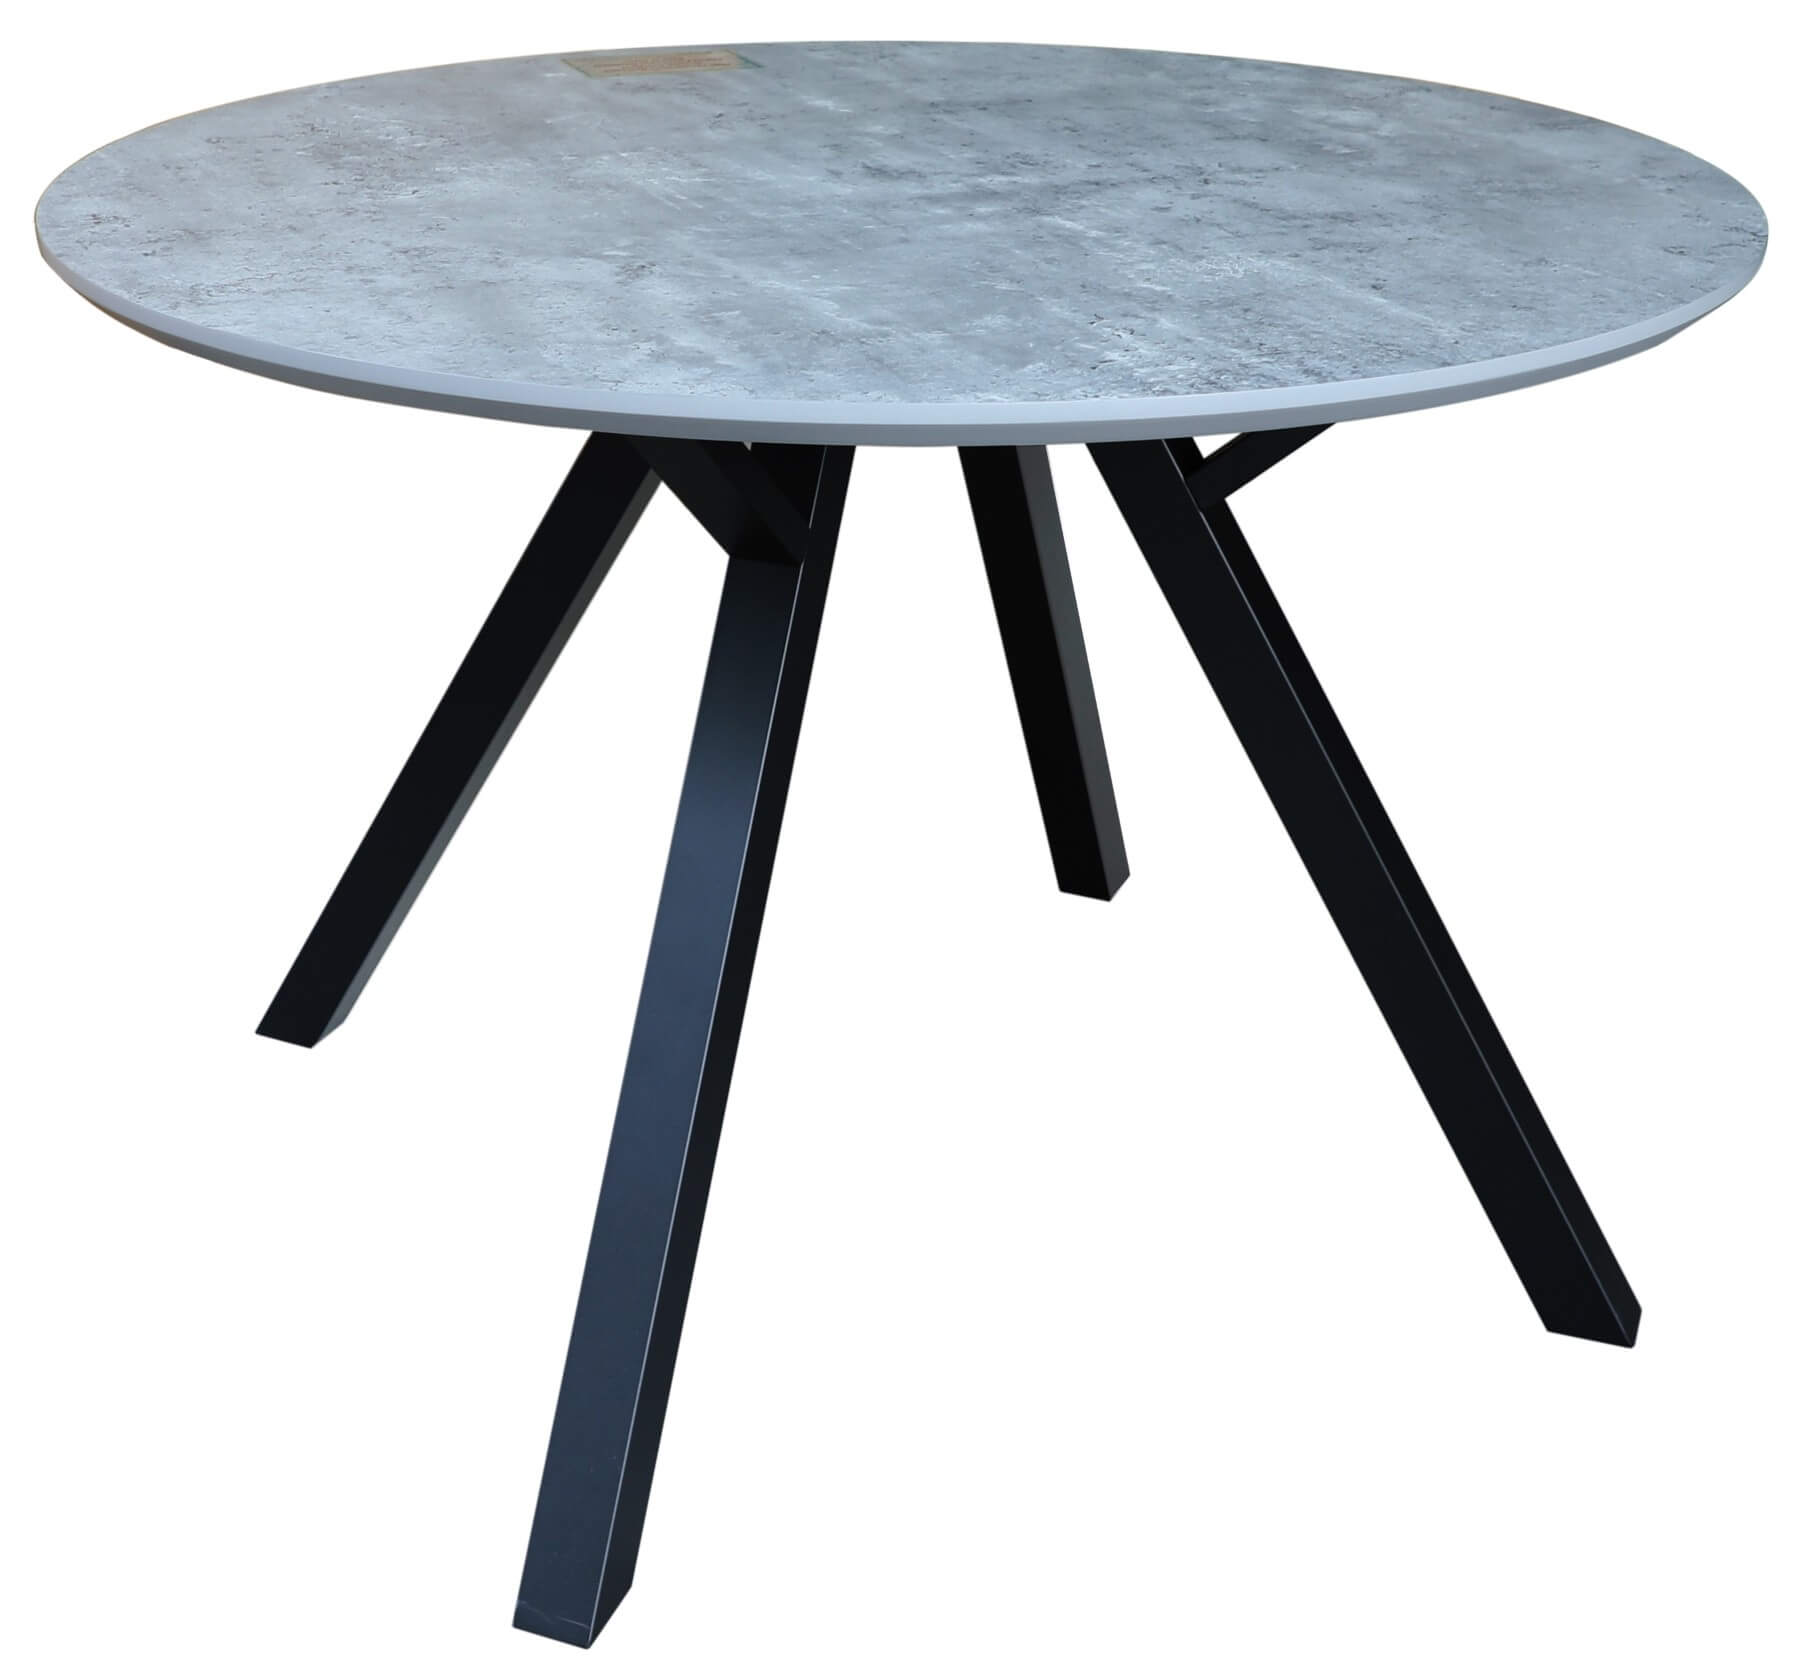 Showing image for Fengo dining table - round